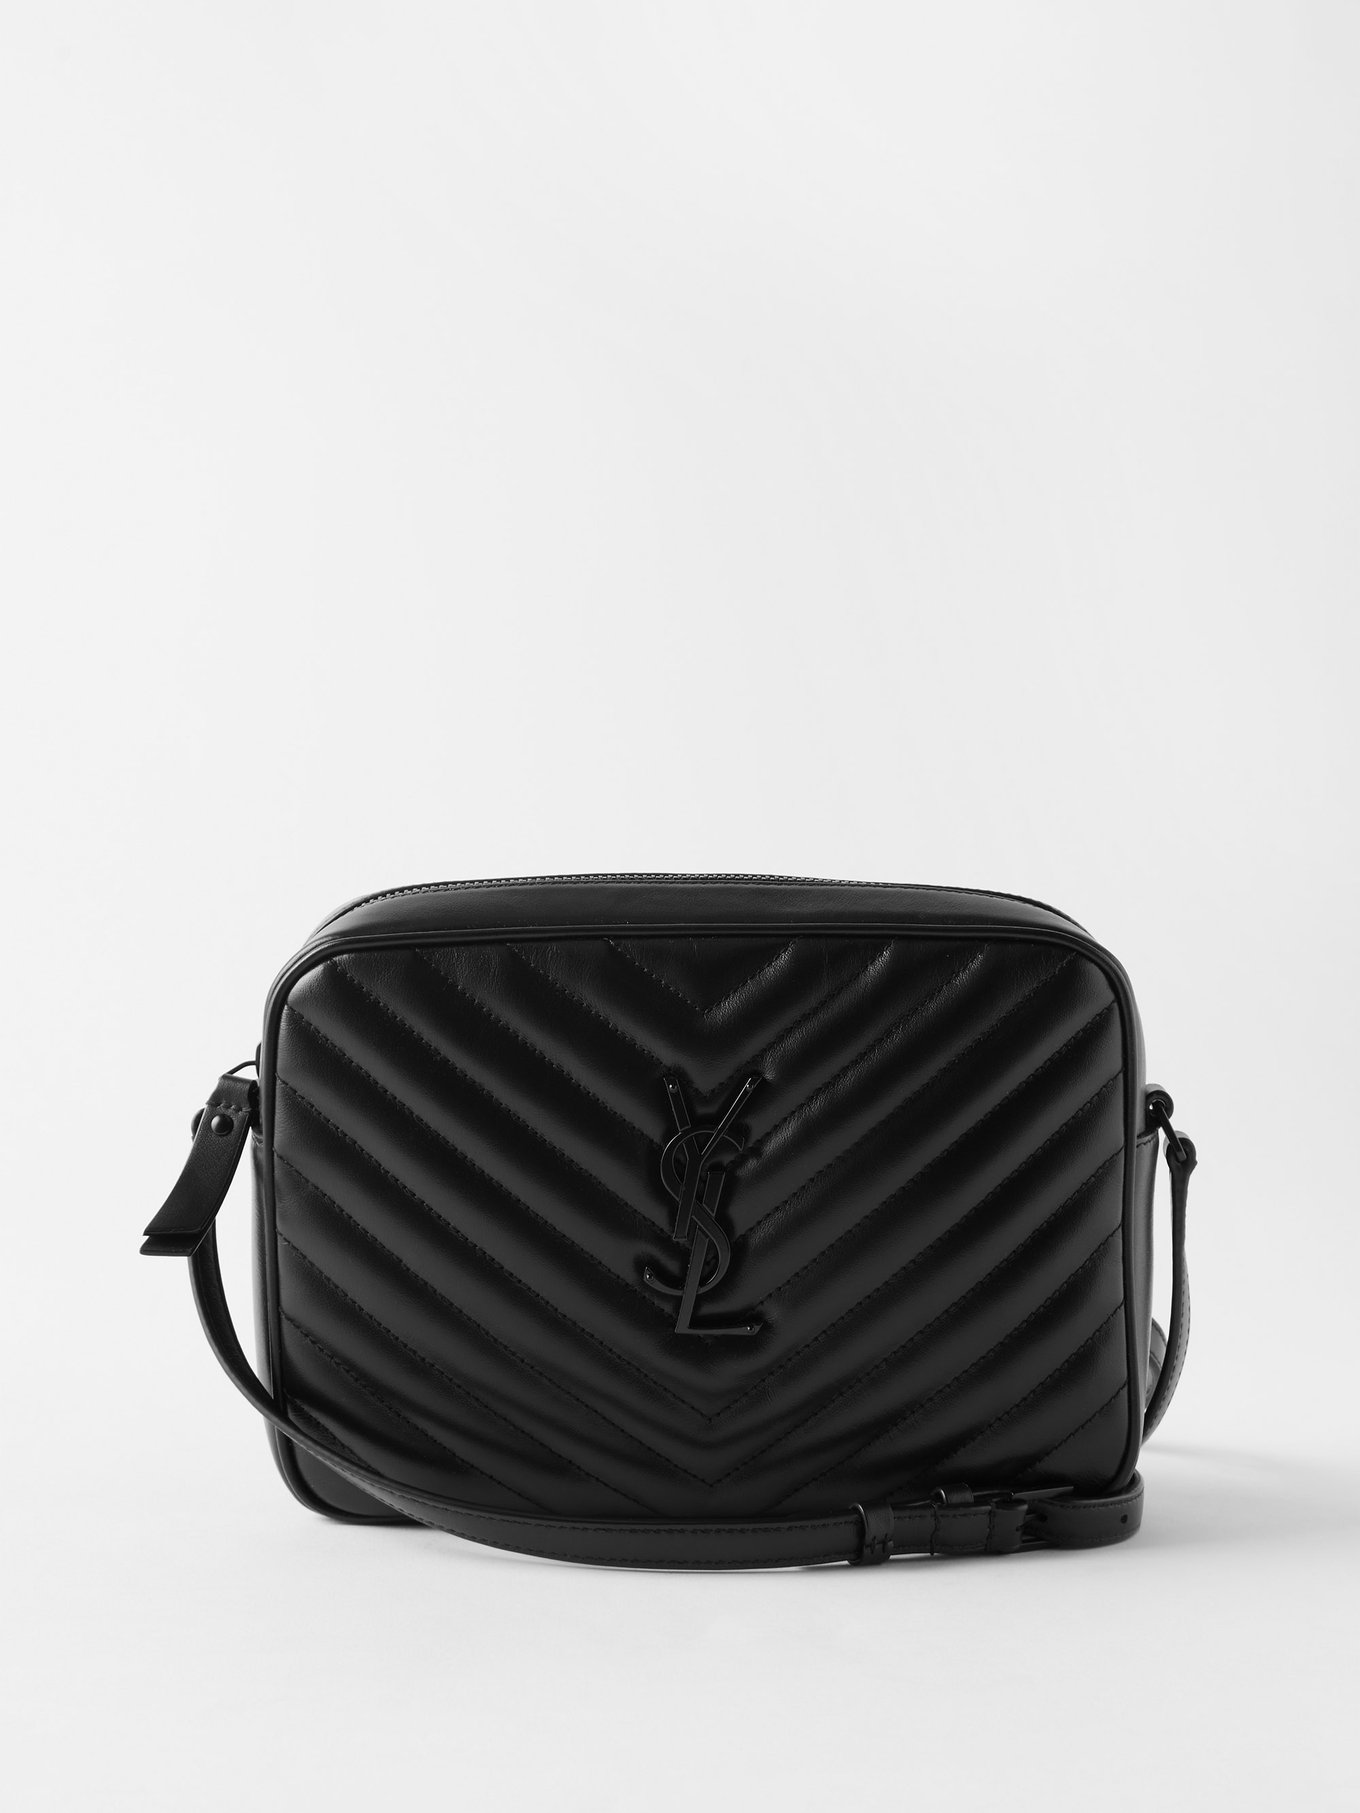 Saint Laurent Lou Mini Bag in Quilted Shiny Leather - White - Women